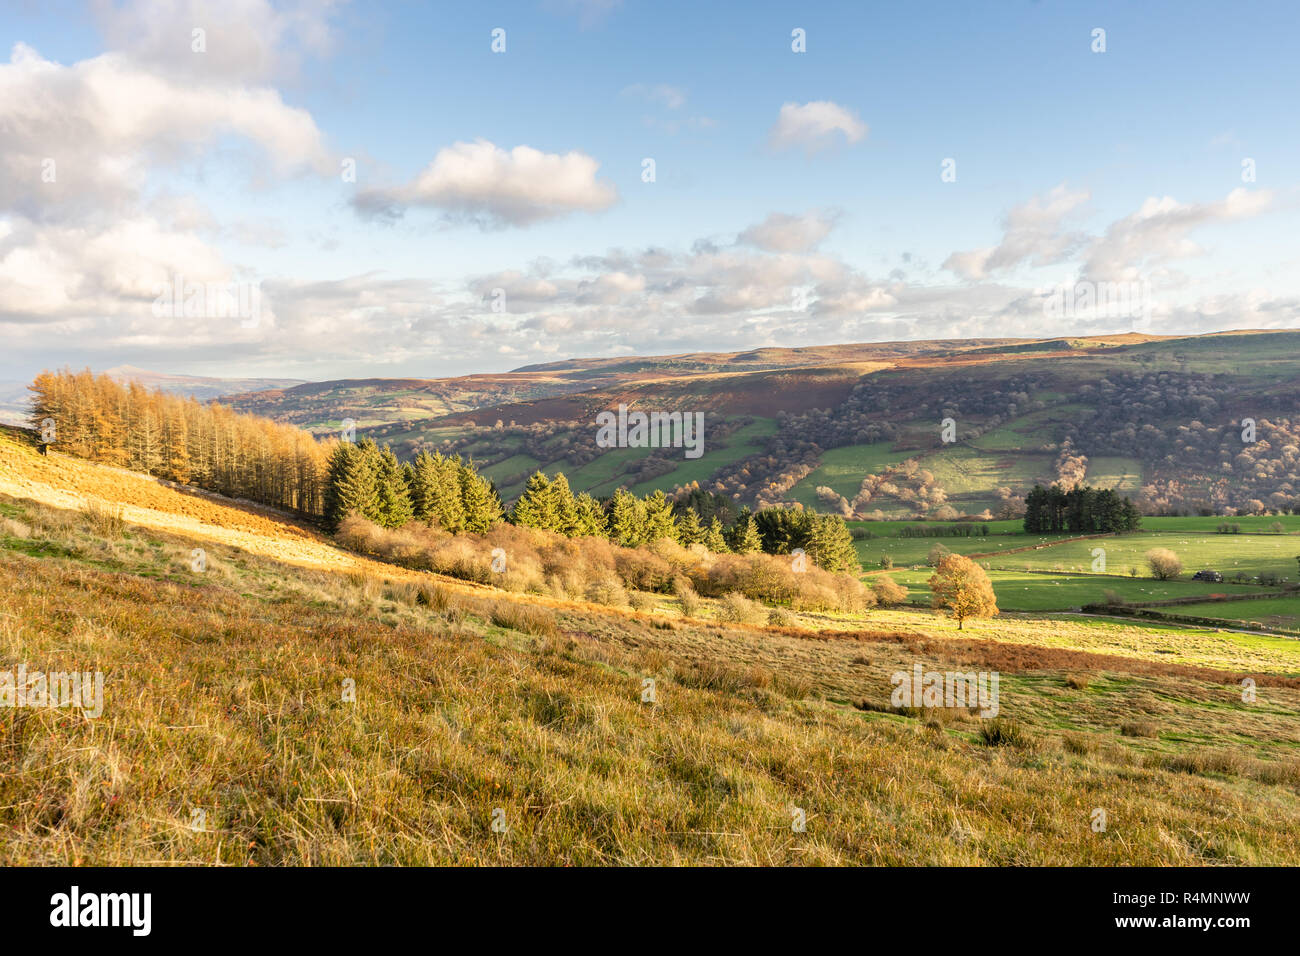 View from Tor-y-foel mountain in the Brecon Beacons National Park, Powys, South Wales, UK Stock Photo